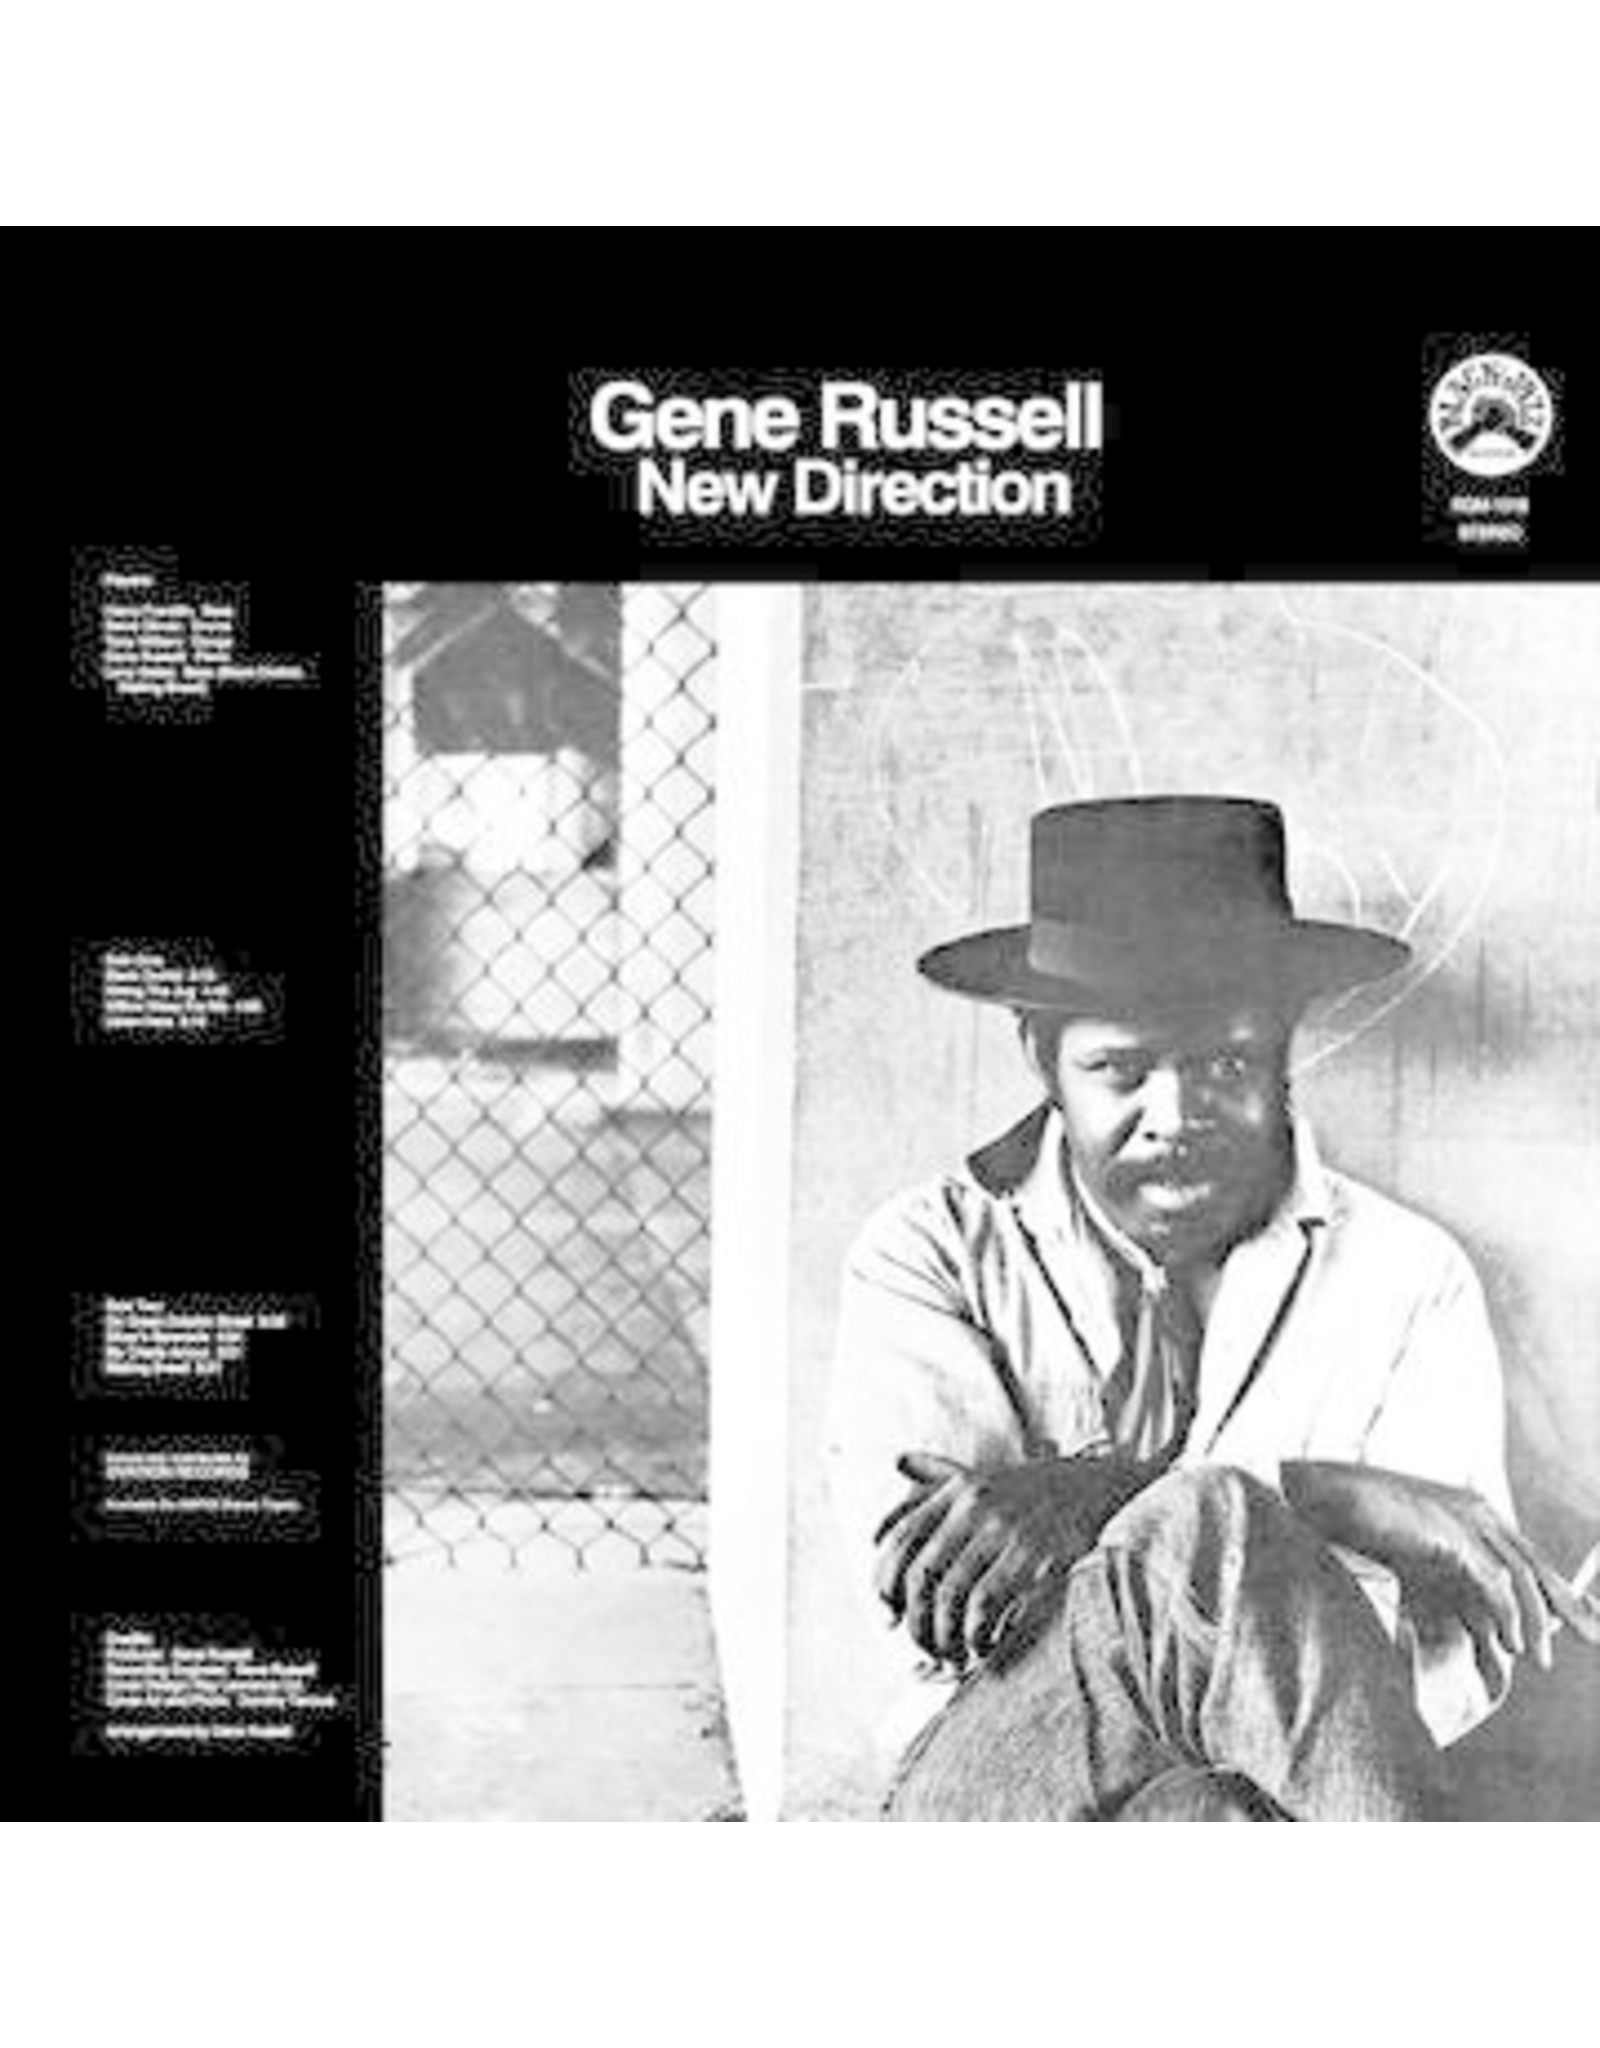 Real Gone Russell, Gene: New Direction LP